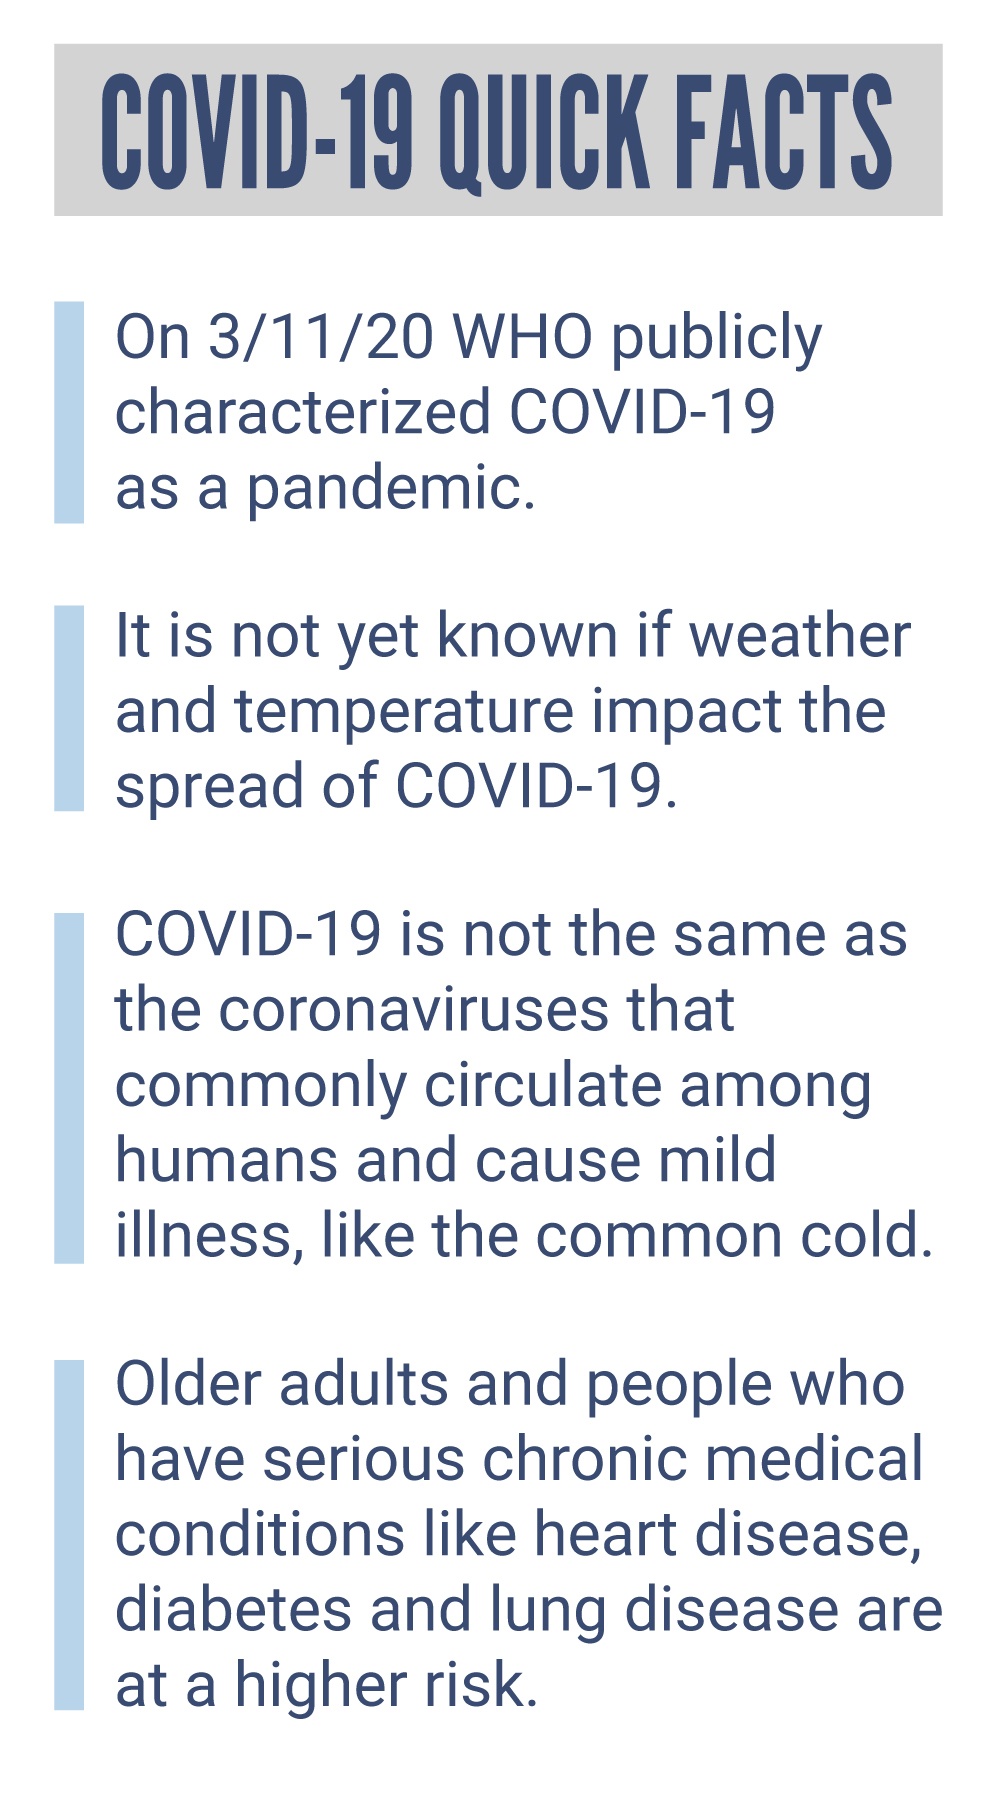 COVID-19 Quick Facts Infographic